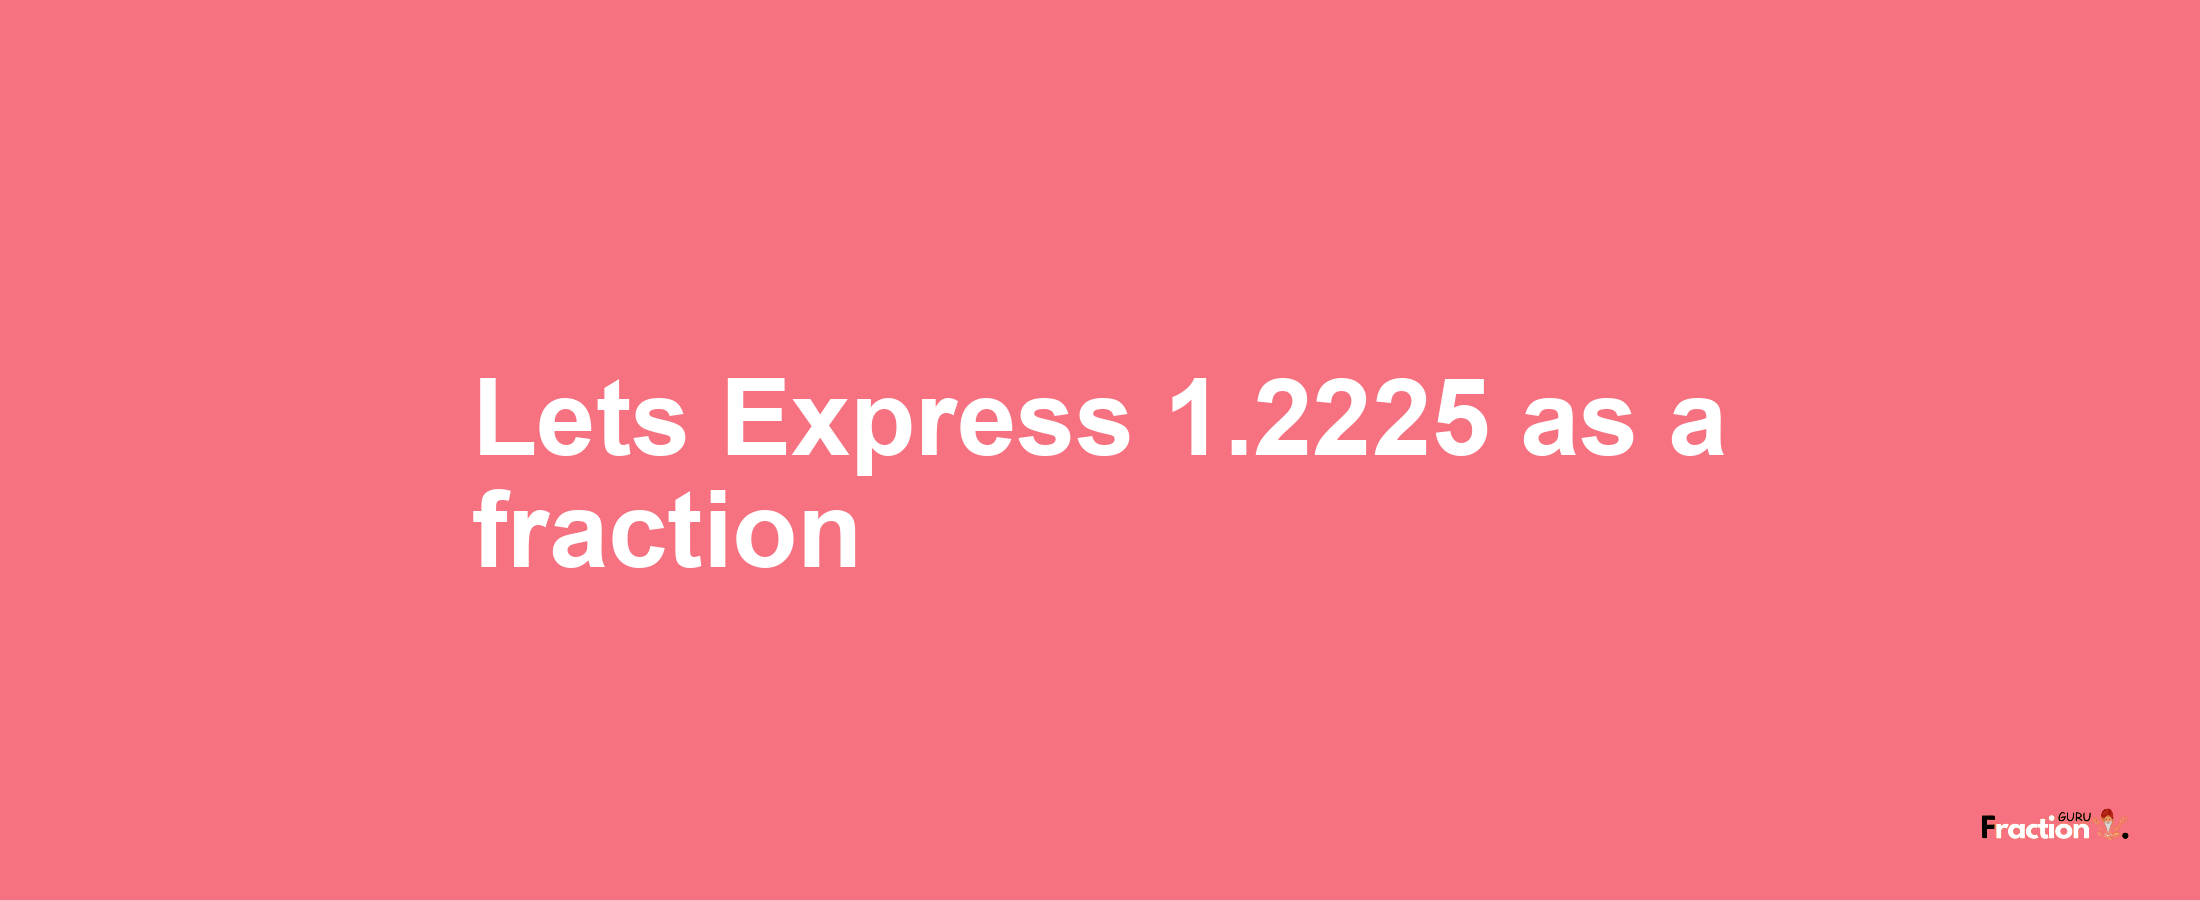 Lets Express 1.2225 as afraction